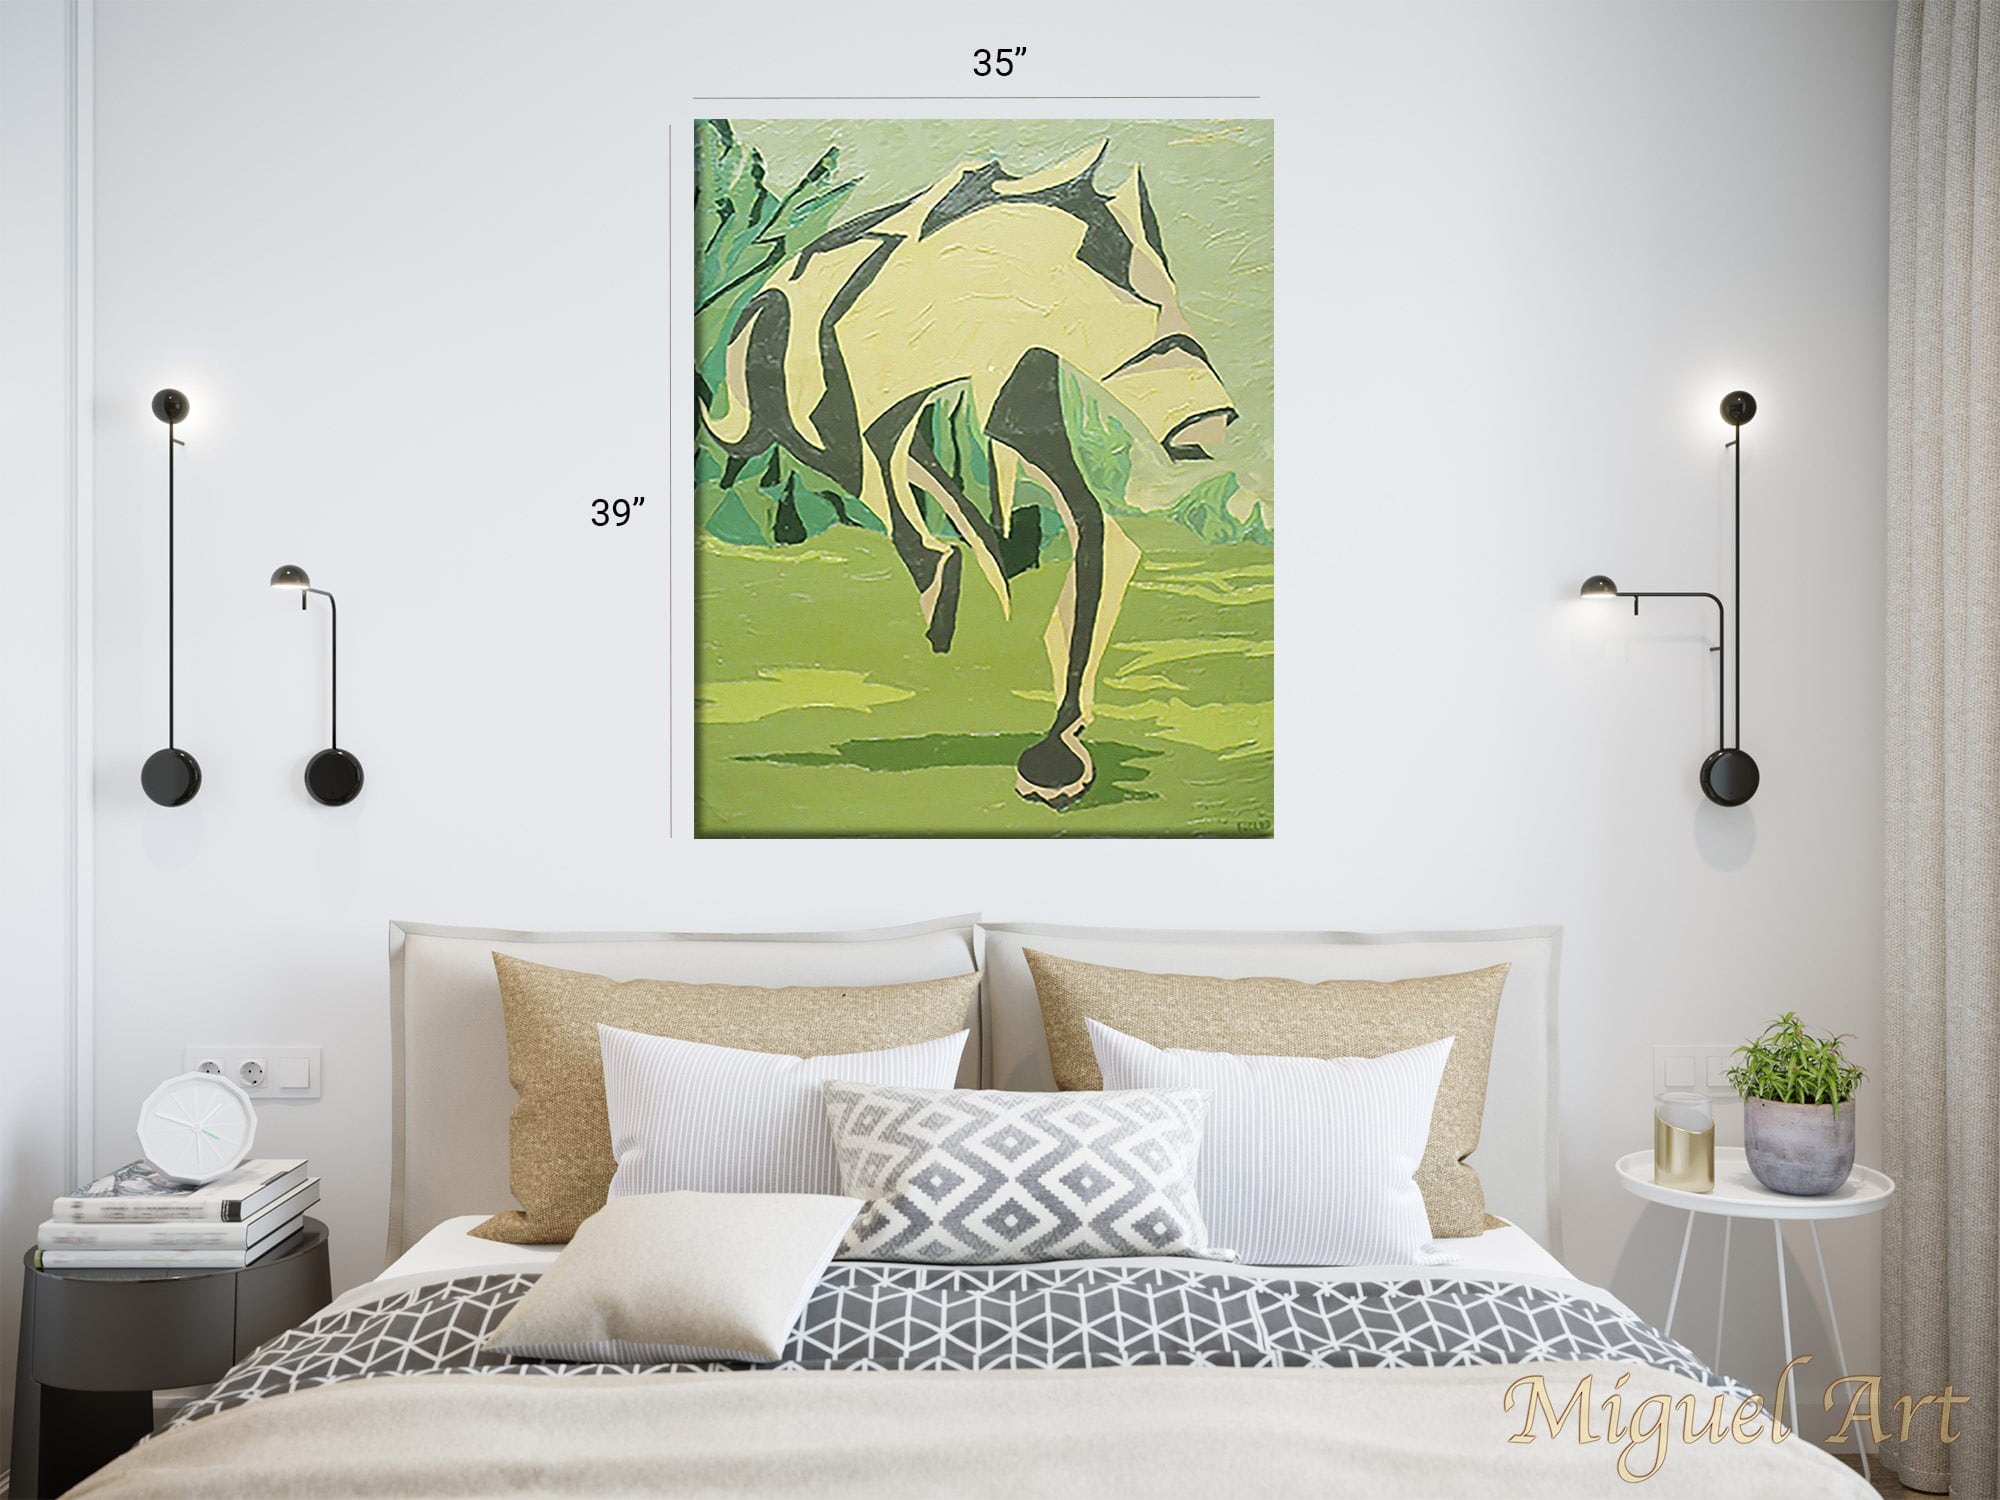 Painting of Cavalo displayed on a white wall in a bedroom